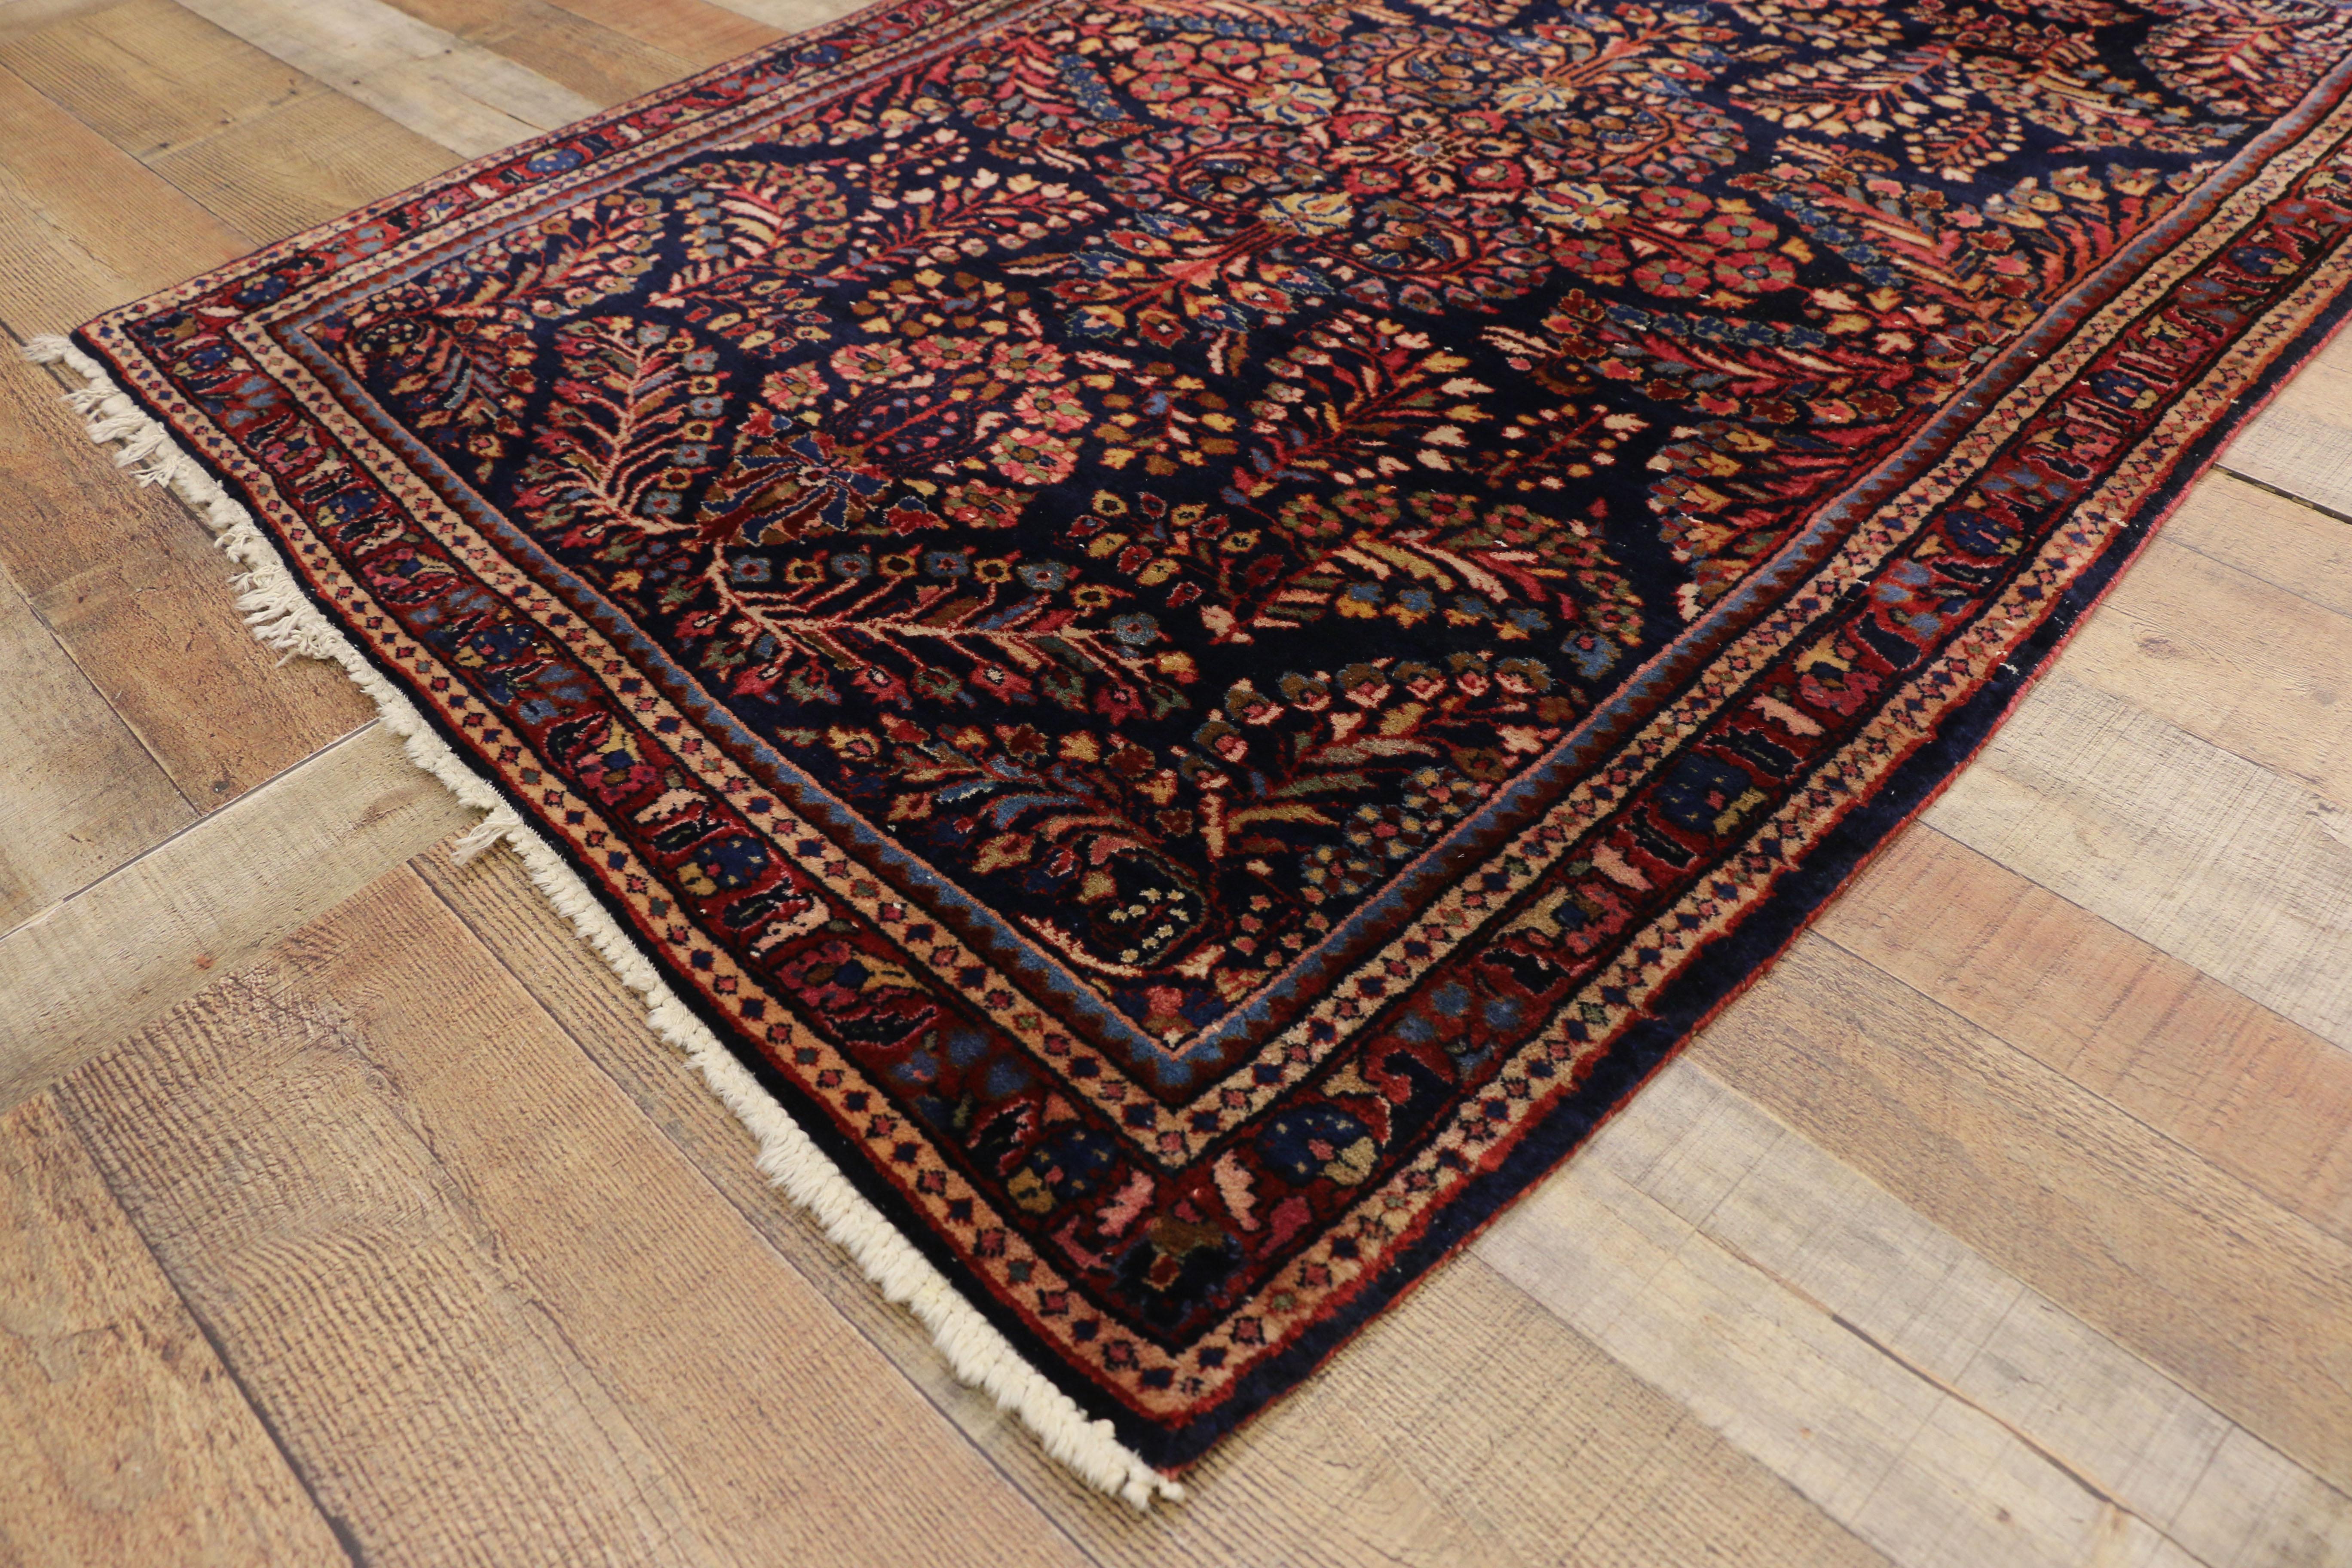 20th Century Antique Persian Sarouk Rug with Luxe Victorian Style, Scatter Rug